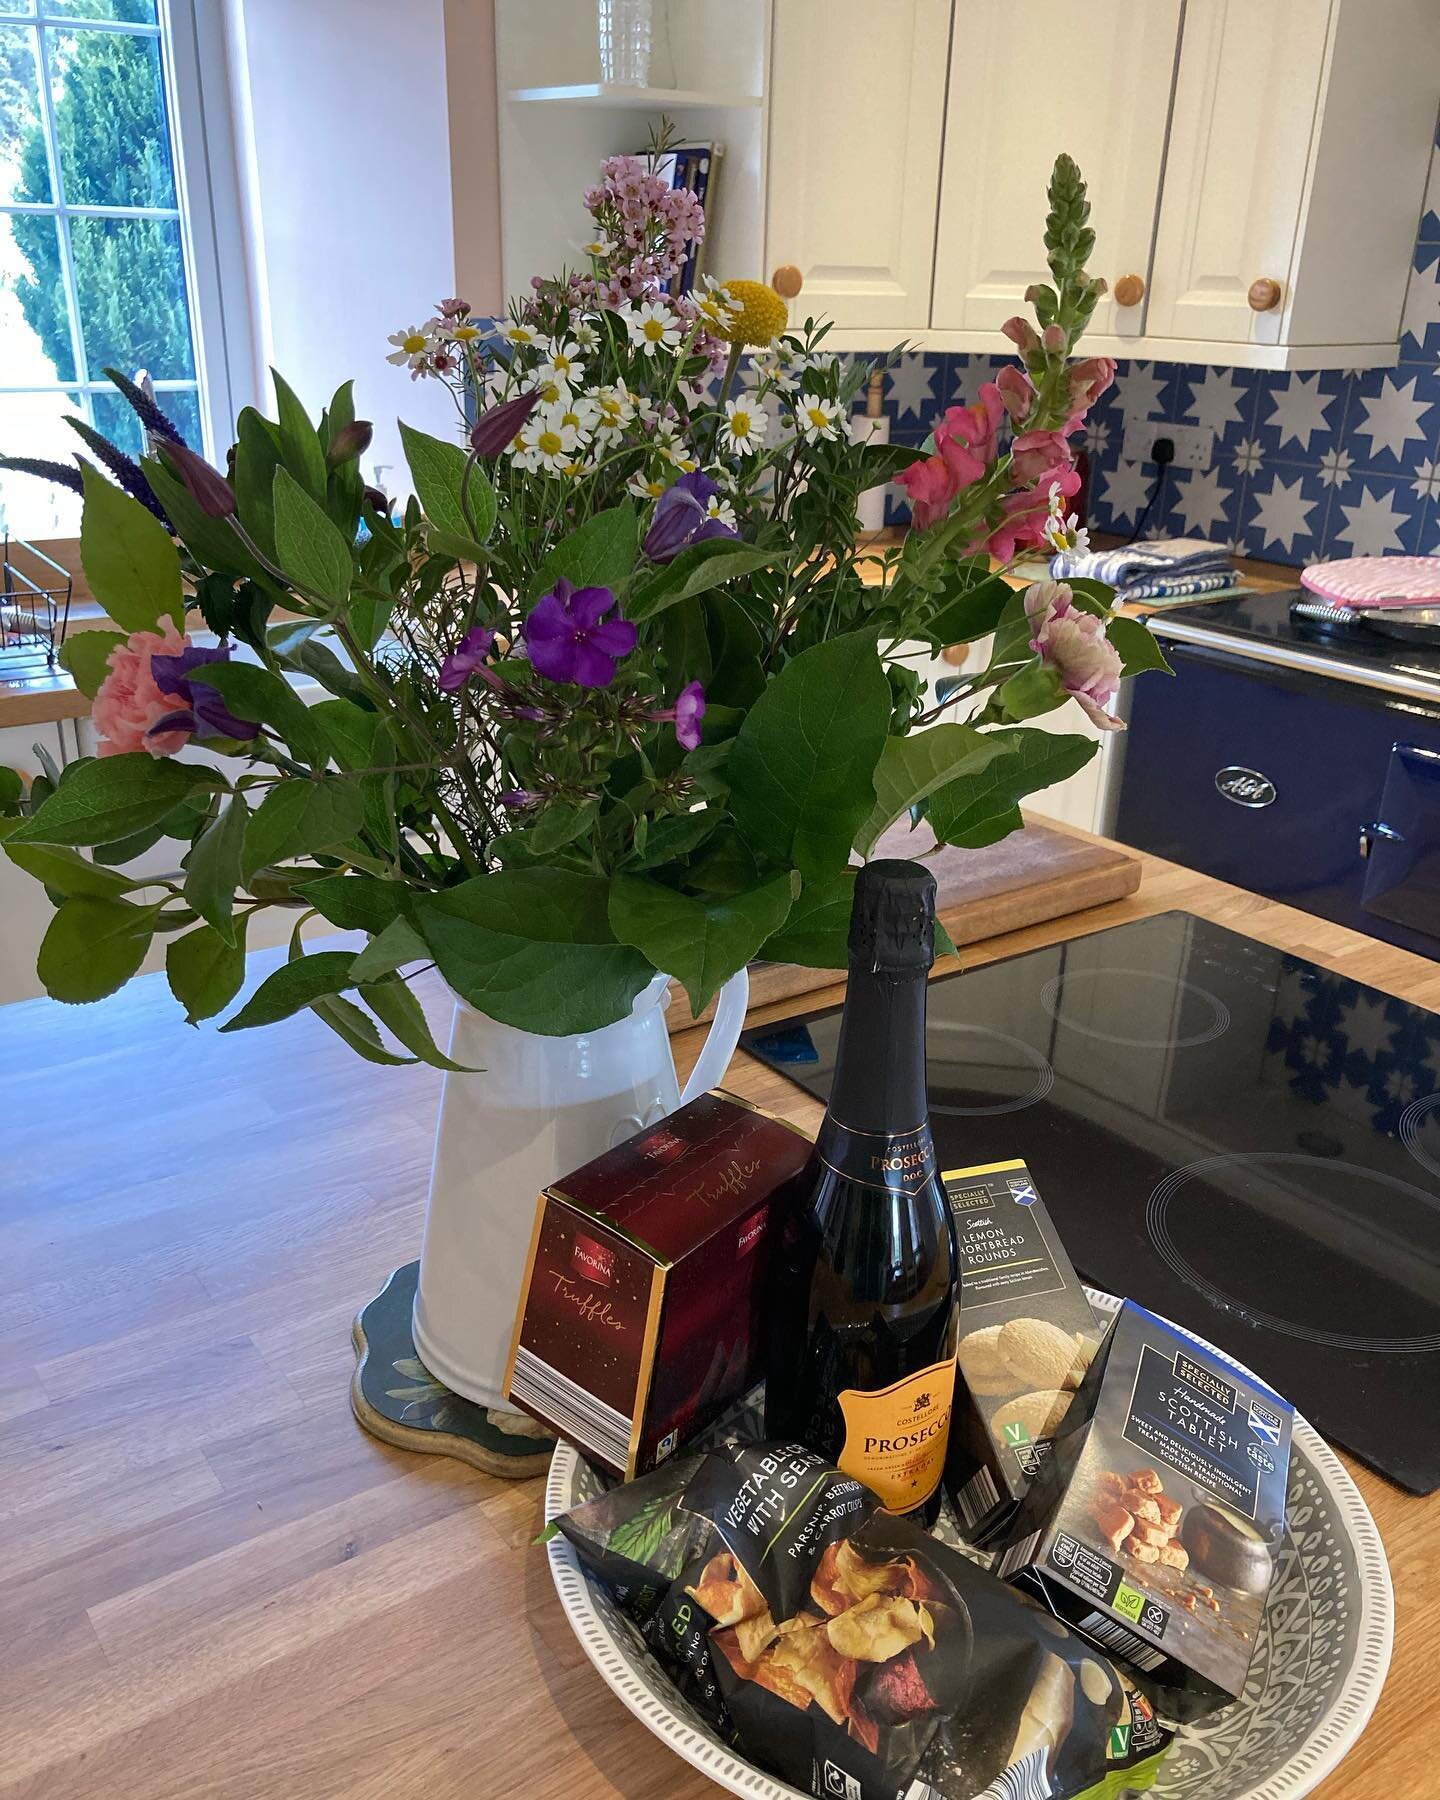 Mackside farm house ready to welcome our first guests this weekend. Beautiful flowers from local @stemsofjedburgh as always. We still have some availability in May and July, then plenty September onwards....sleeps 8, Scottish Borders, Hot tub.